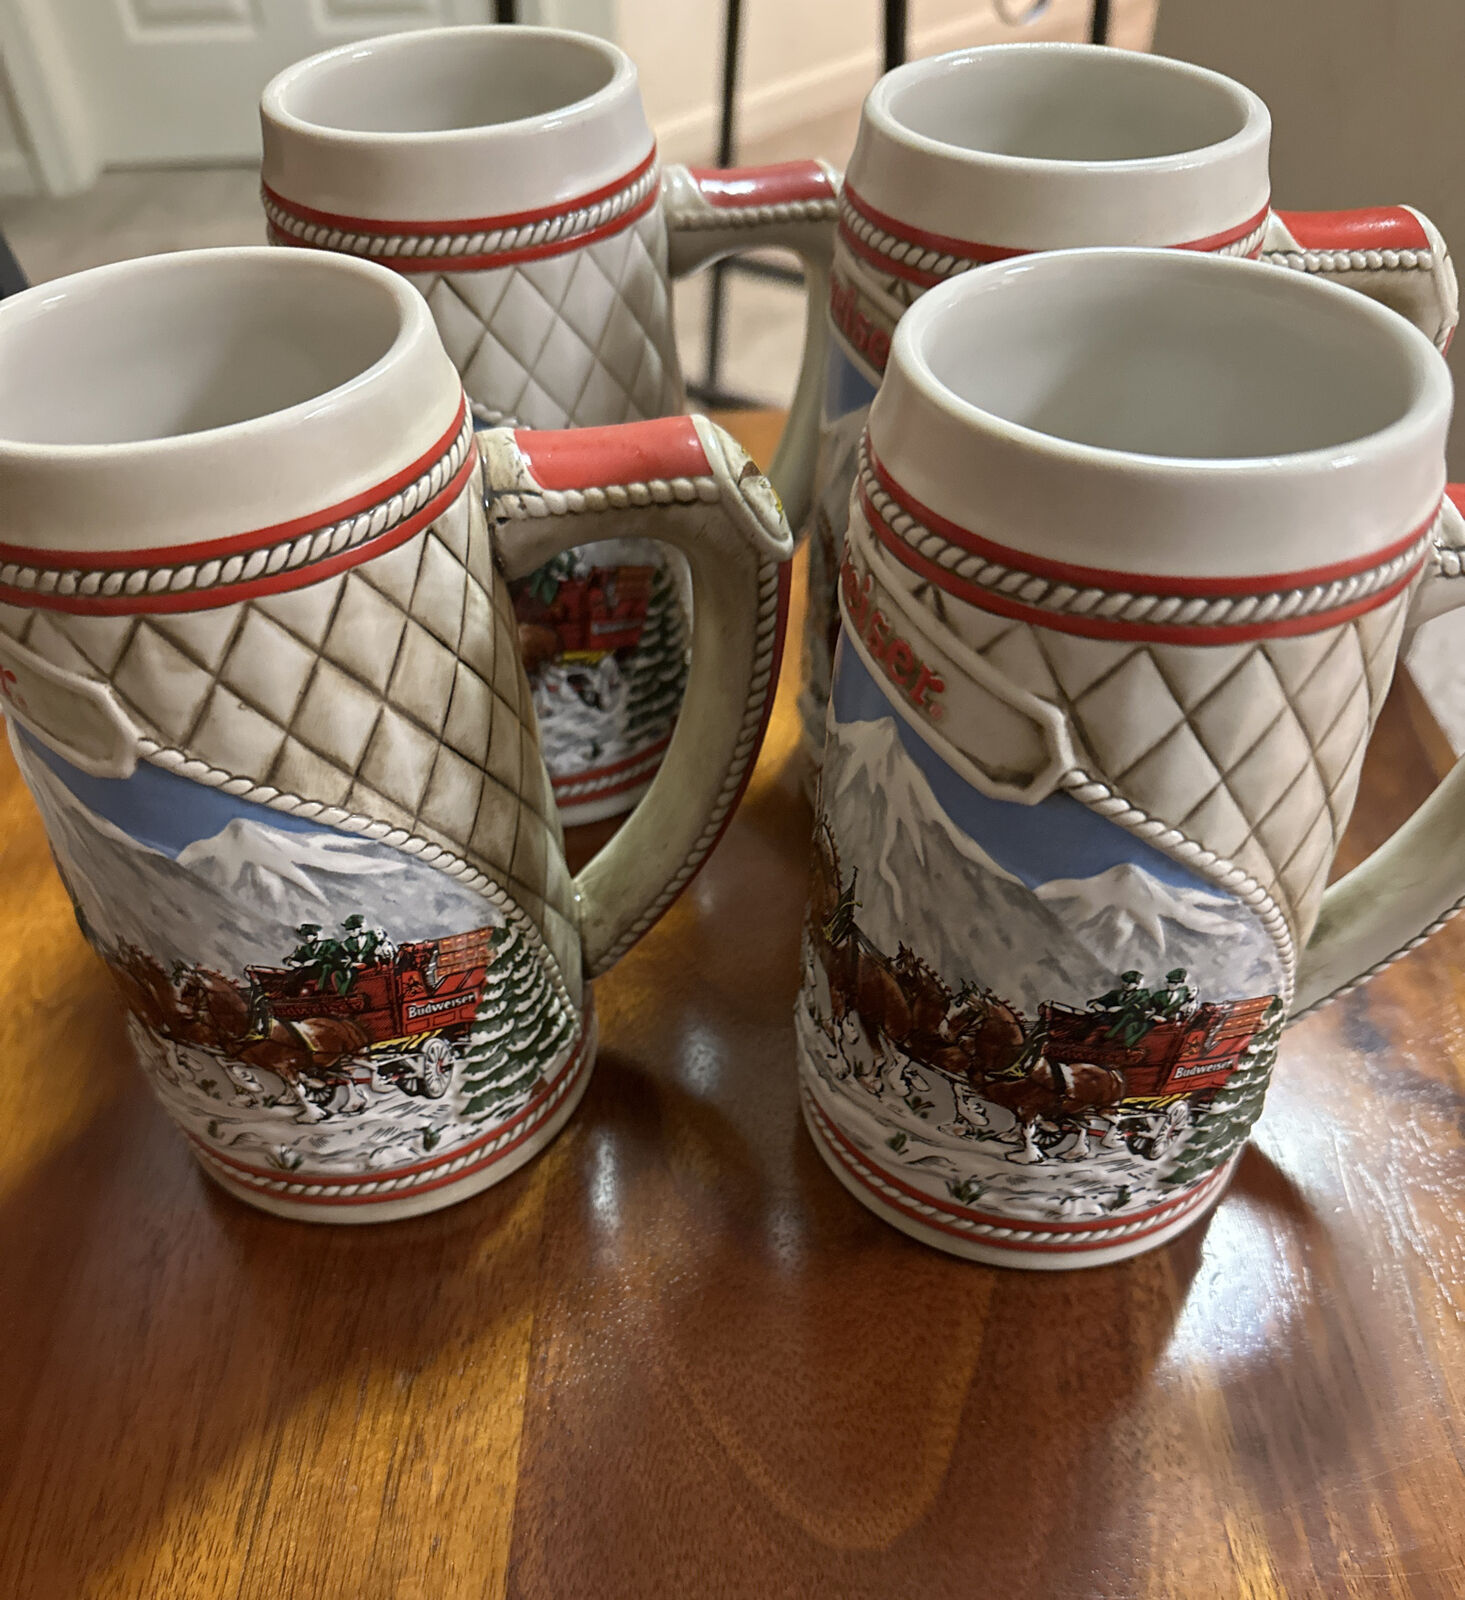 4 x Budweiser “1985” Vintage Holiday Stein Beer Mug - A Series Limited Edition